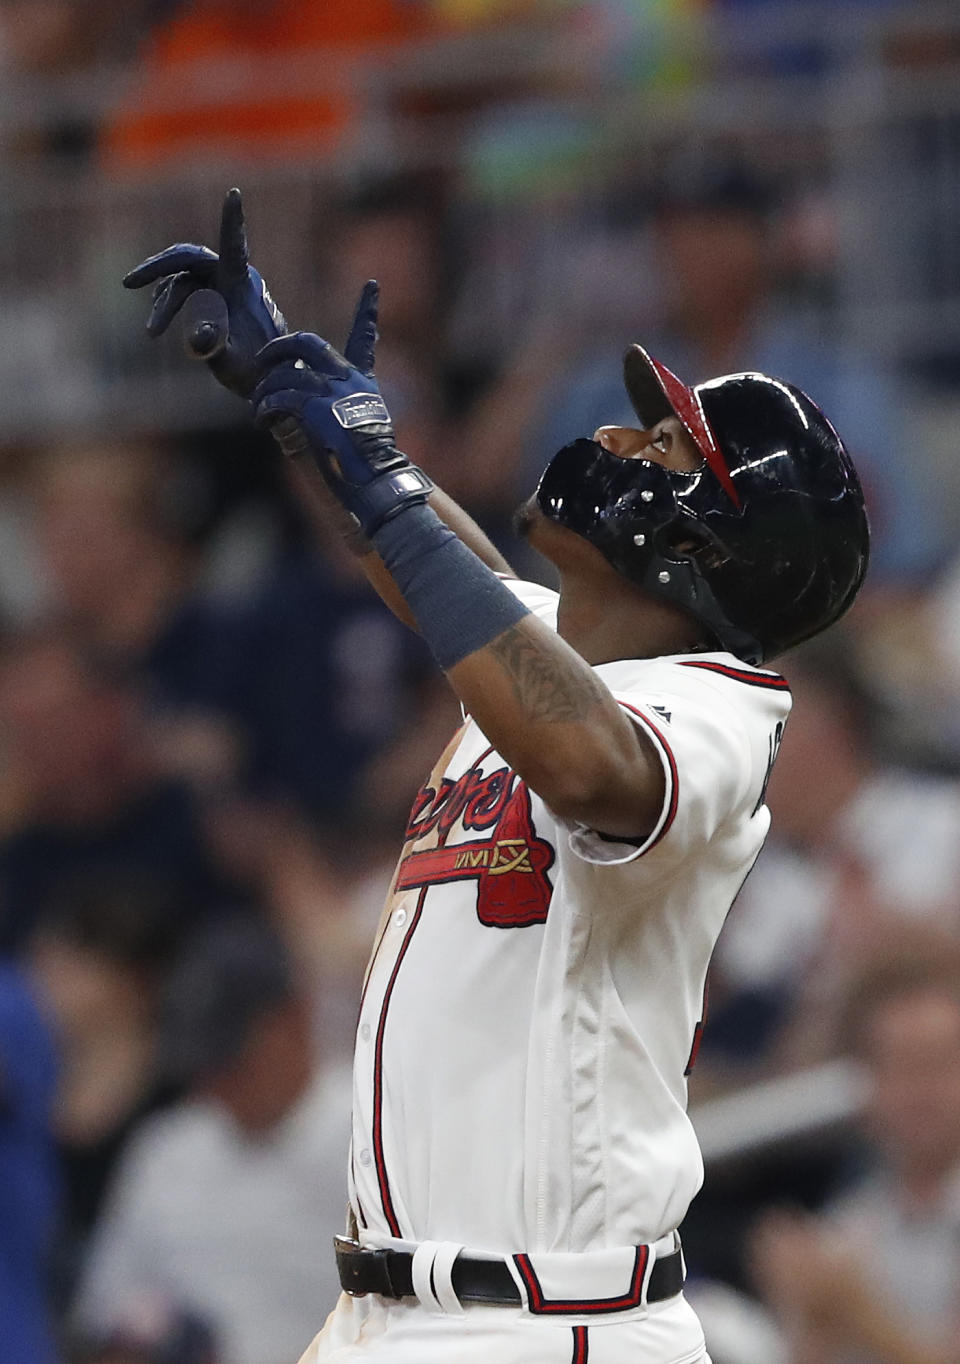 Atlanta Braves' Ronald Acuna Jr. (13) points skyward after driving in a run with a base hit in the sixth inning of the second baseball game of a doubleheader against the Miami Marlins Monday, Aug. 13, 2018 in Atlanta. (AP Photo/John Bazemore)